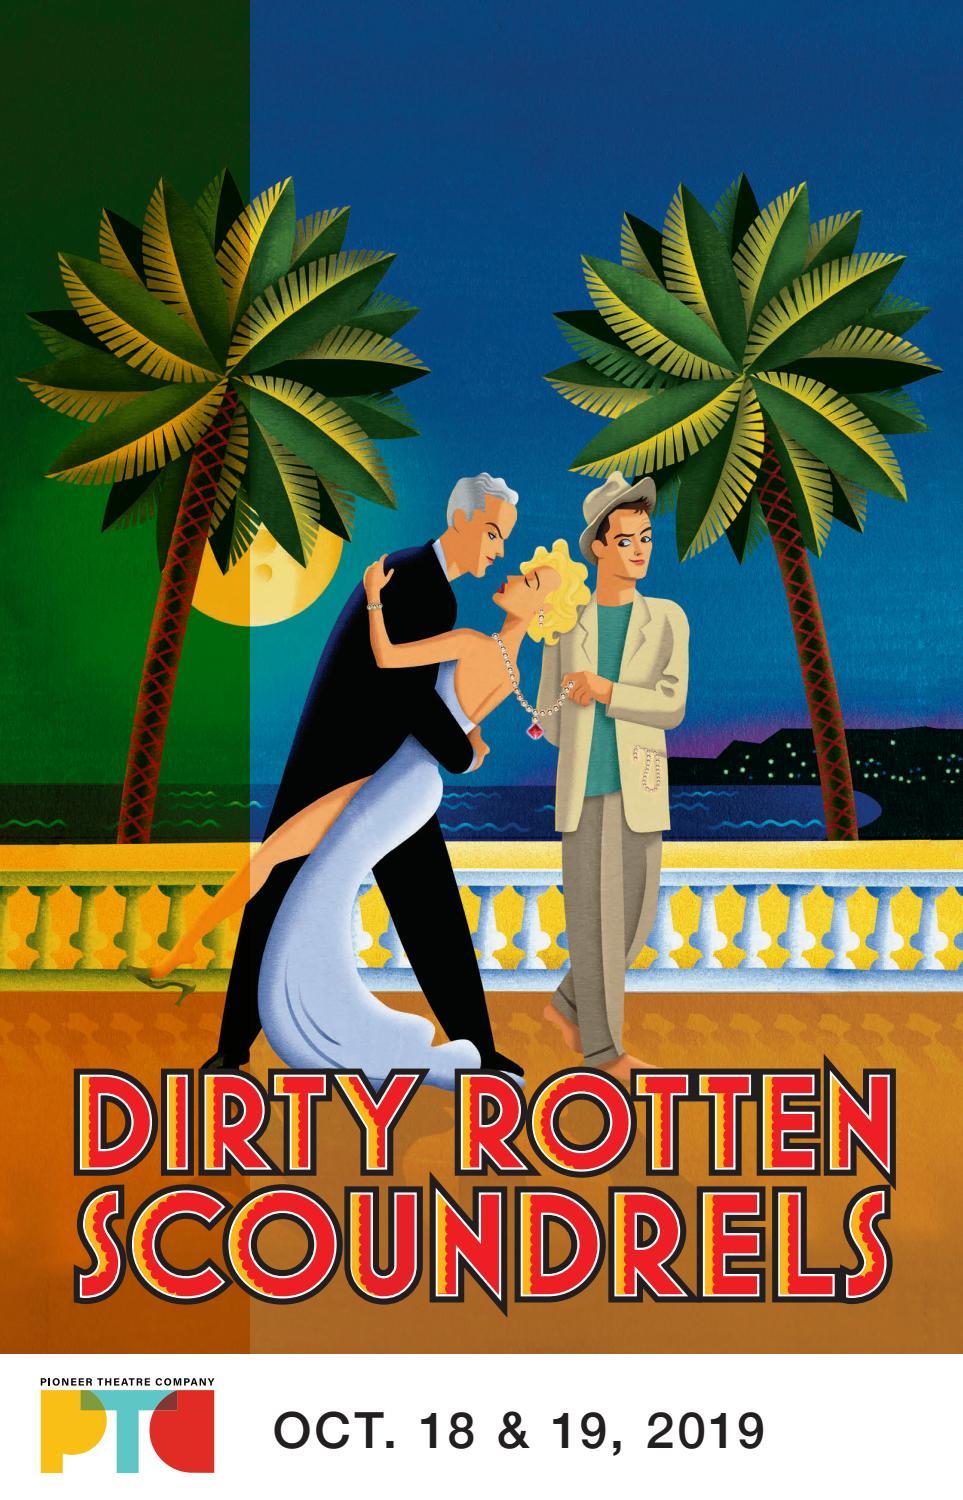 Centerstage Theatre presents comedy ‘Dirty Rotten Scoundrels’